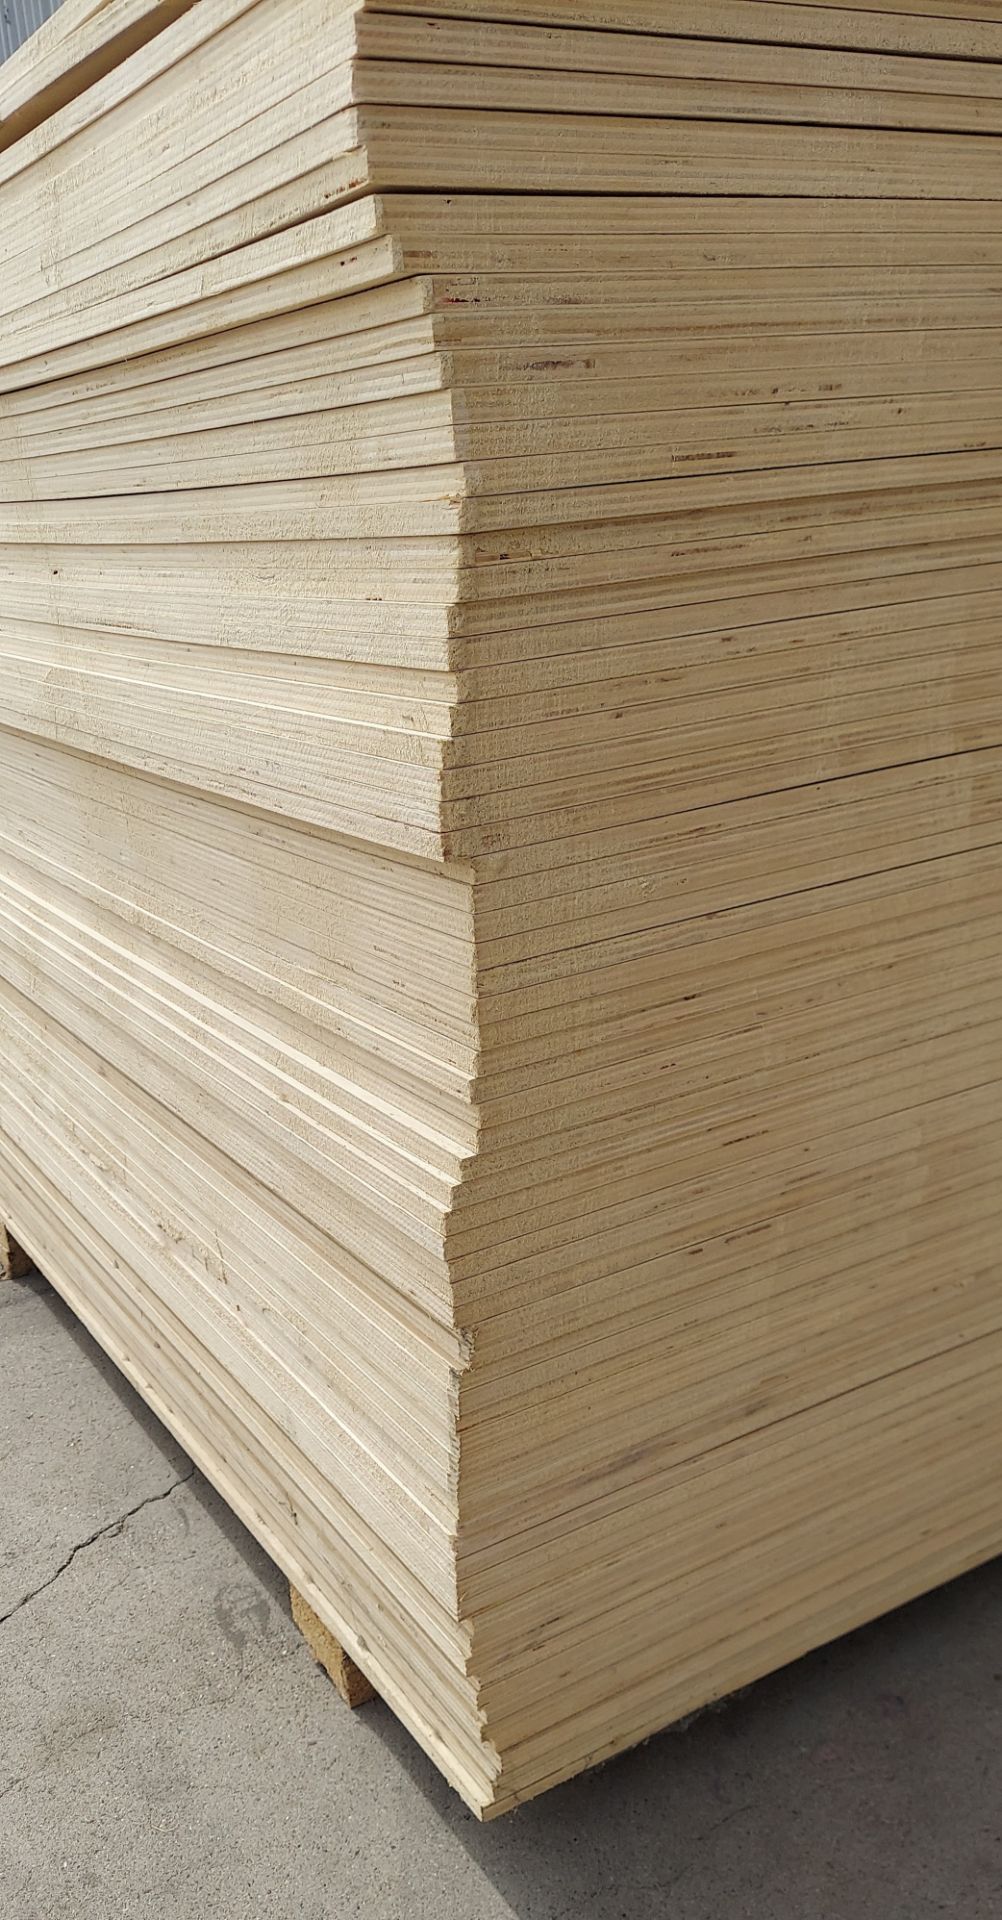 73 Sheets - 12mm (1/2) Birch Plywood 48" X 96" - Image 2 of 5